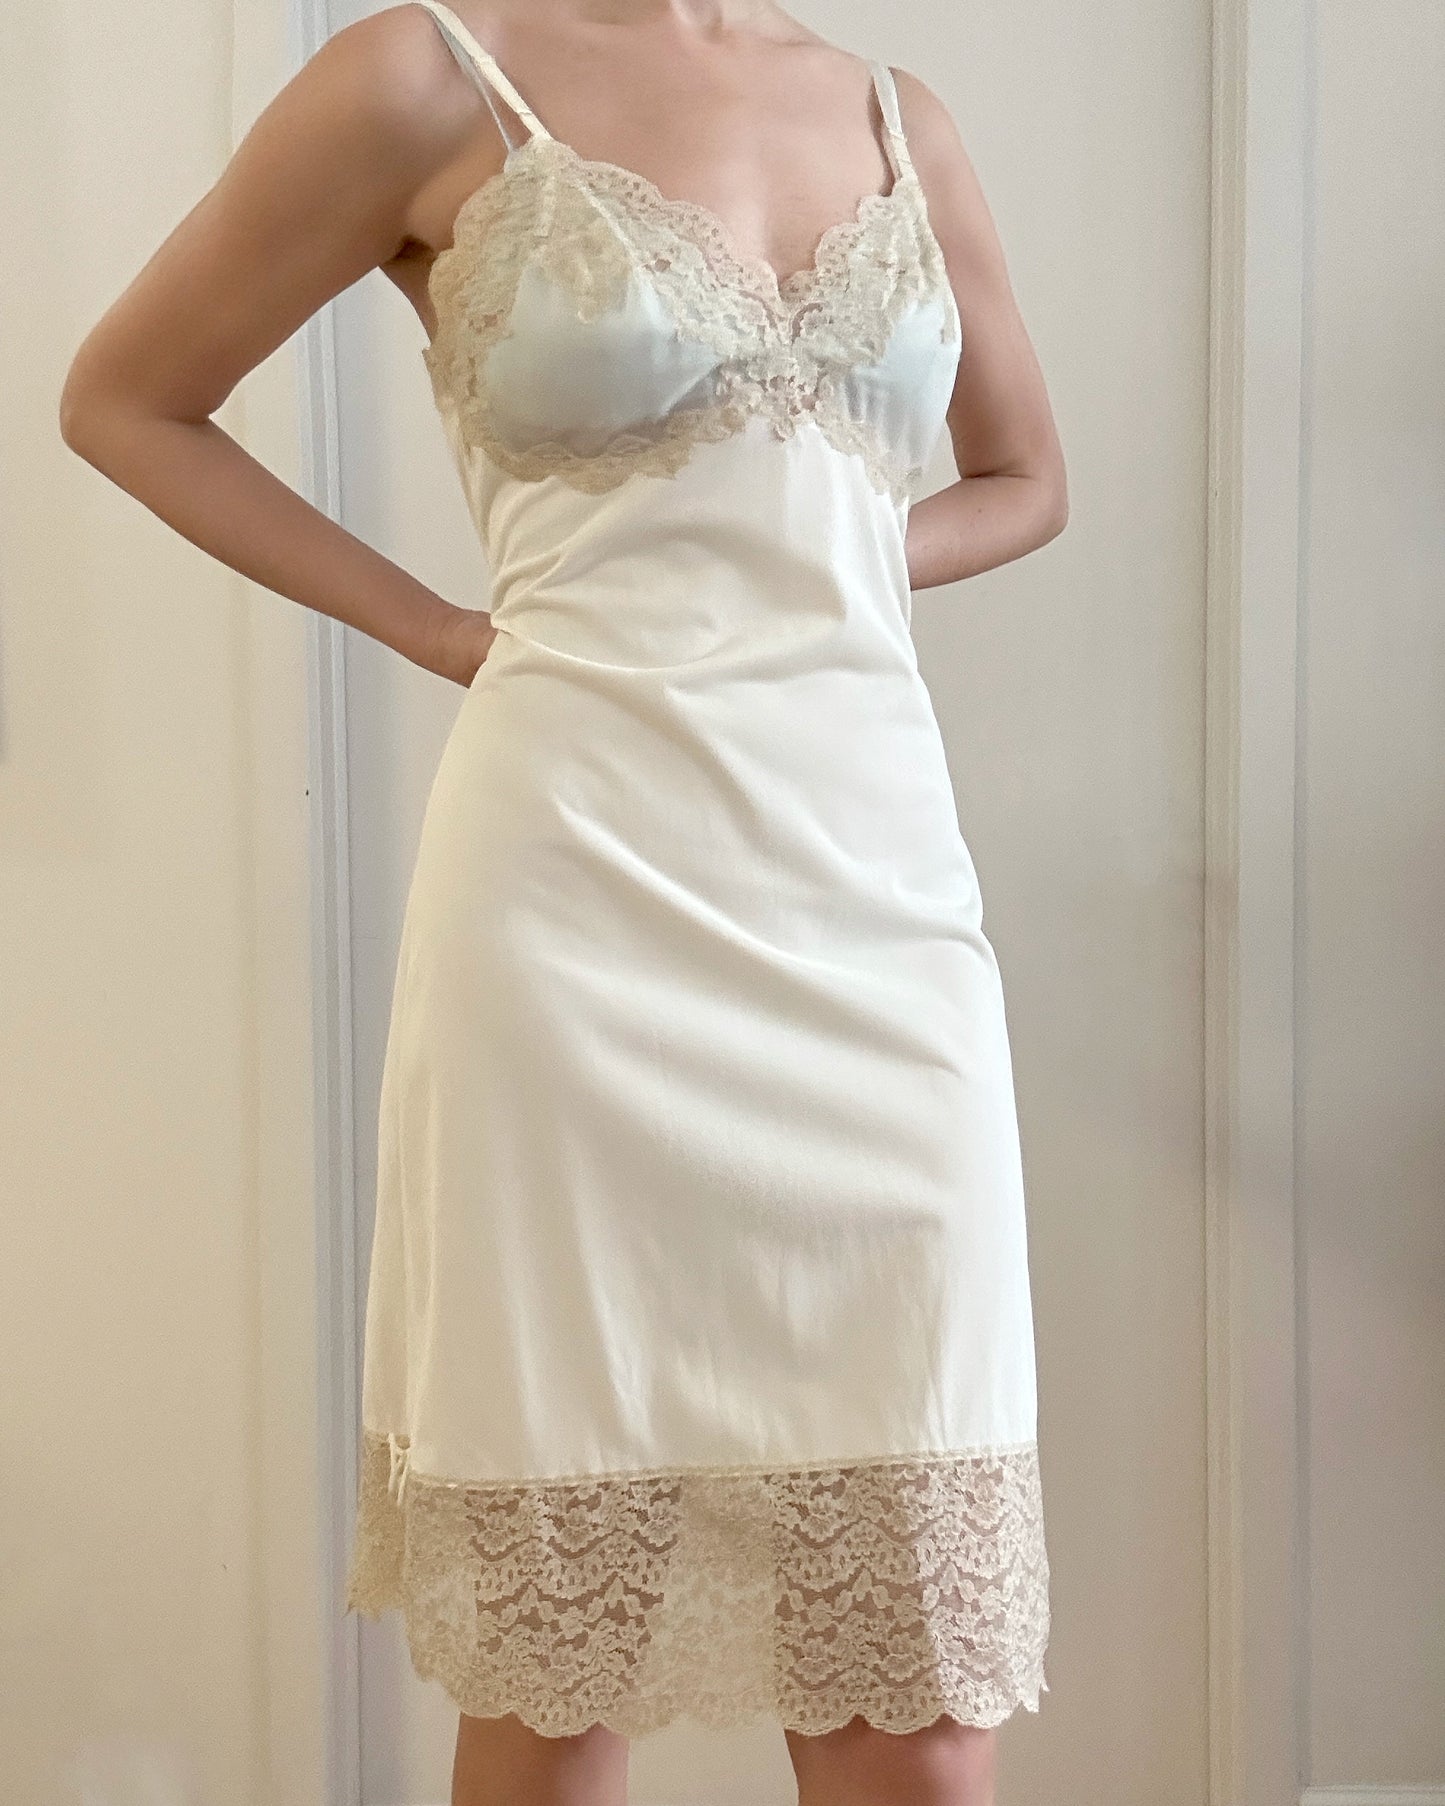 VINTAGE 1960s IVORY SLIP WITH LACE DETAILS